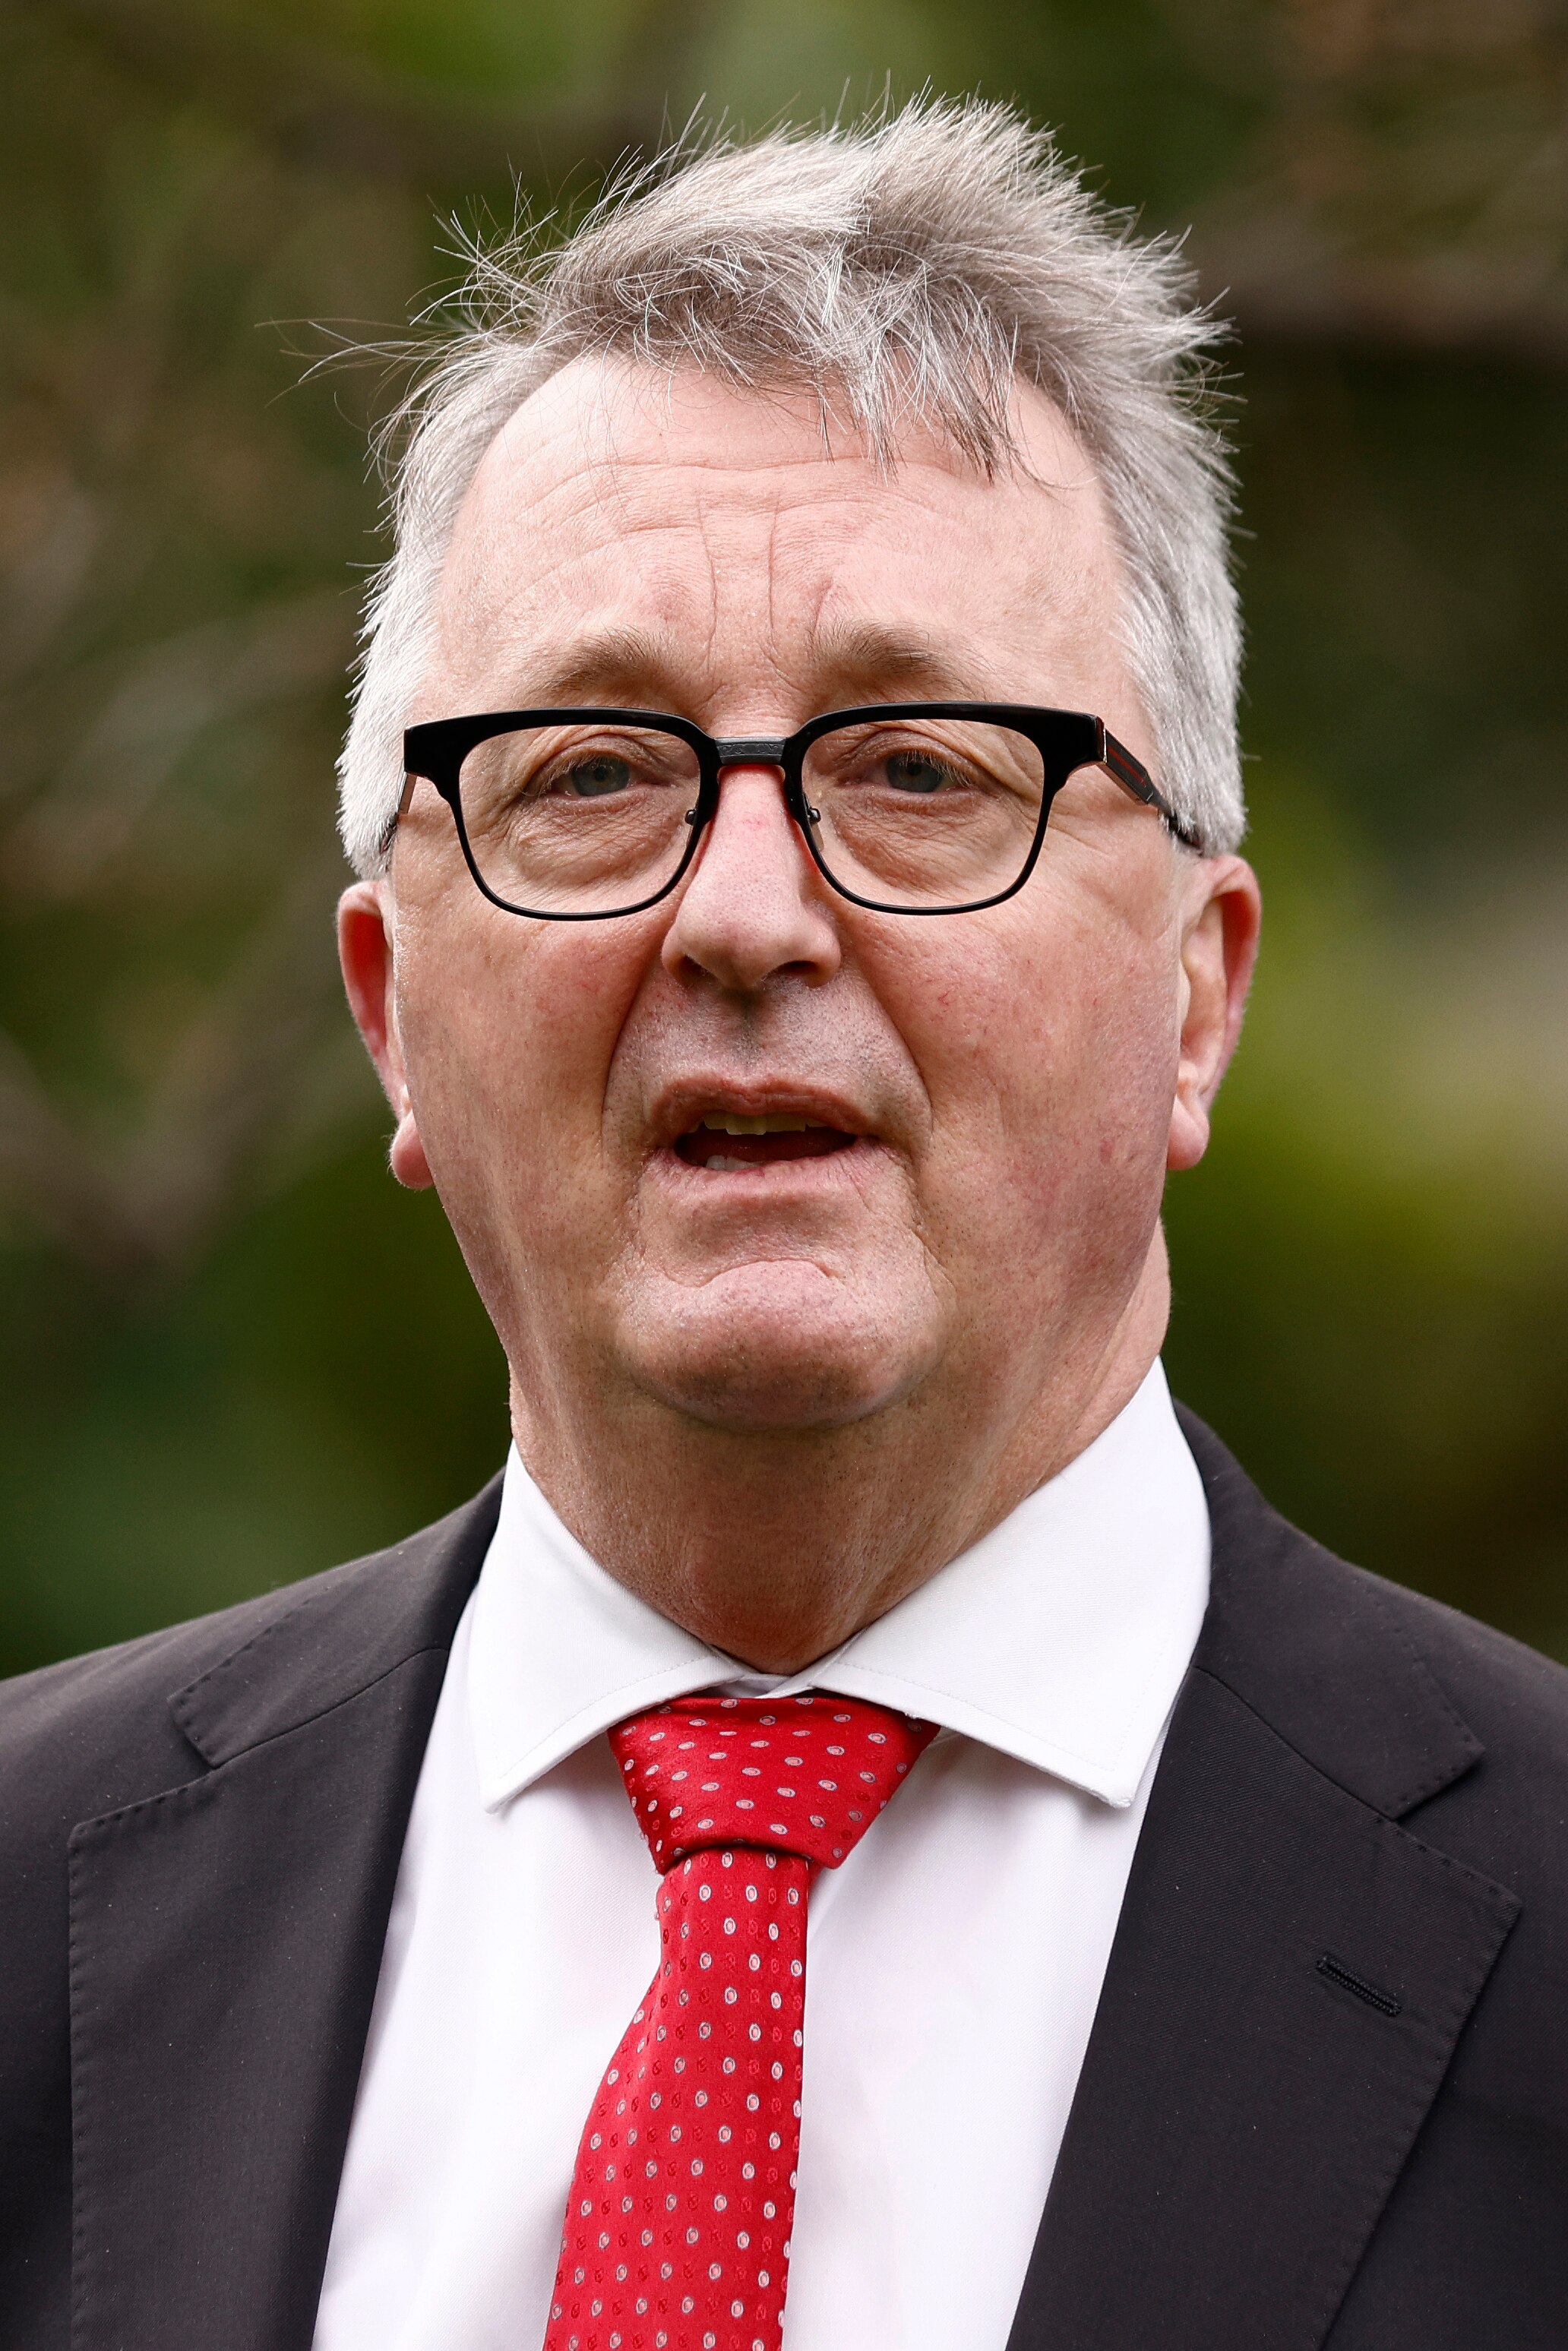 Victorian Health Minister Martin Foley speaks to the media during a press conference in Melbourne, Tuesday, June 8, 2021.  (AAP Image/Daniel Pockett) NO ARCHIVING